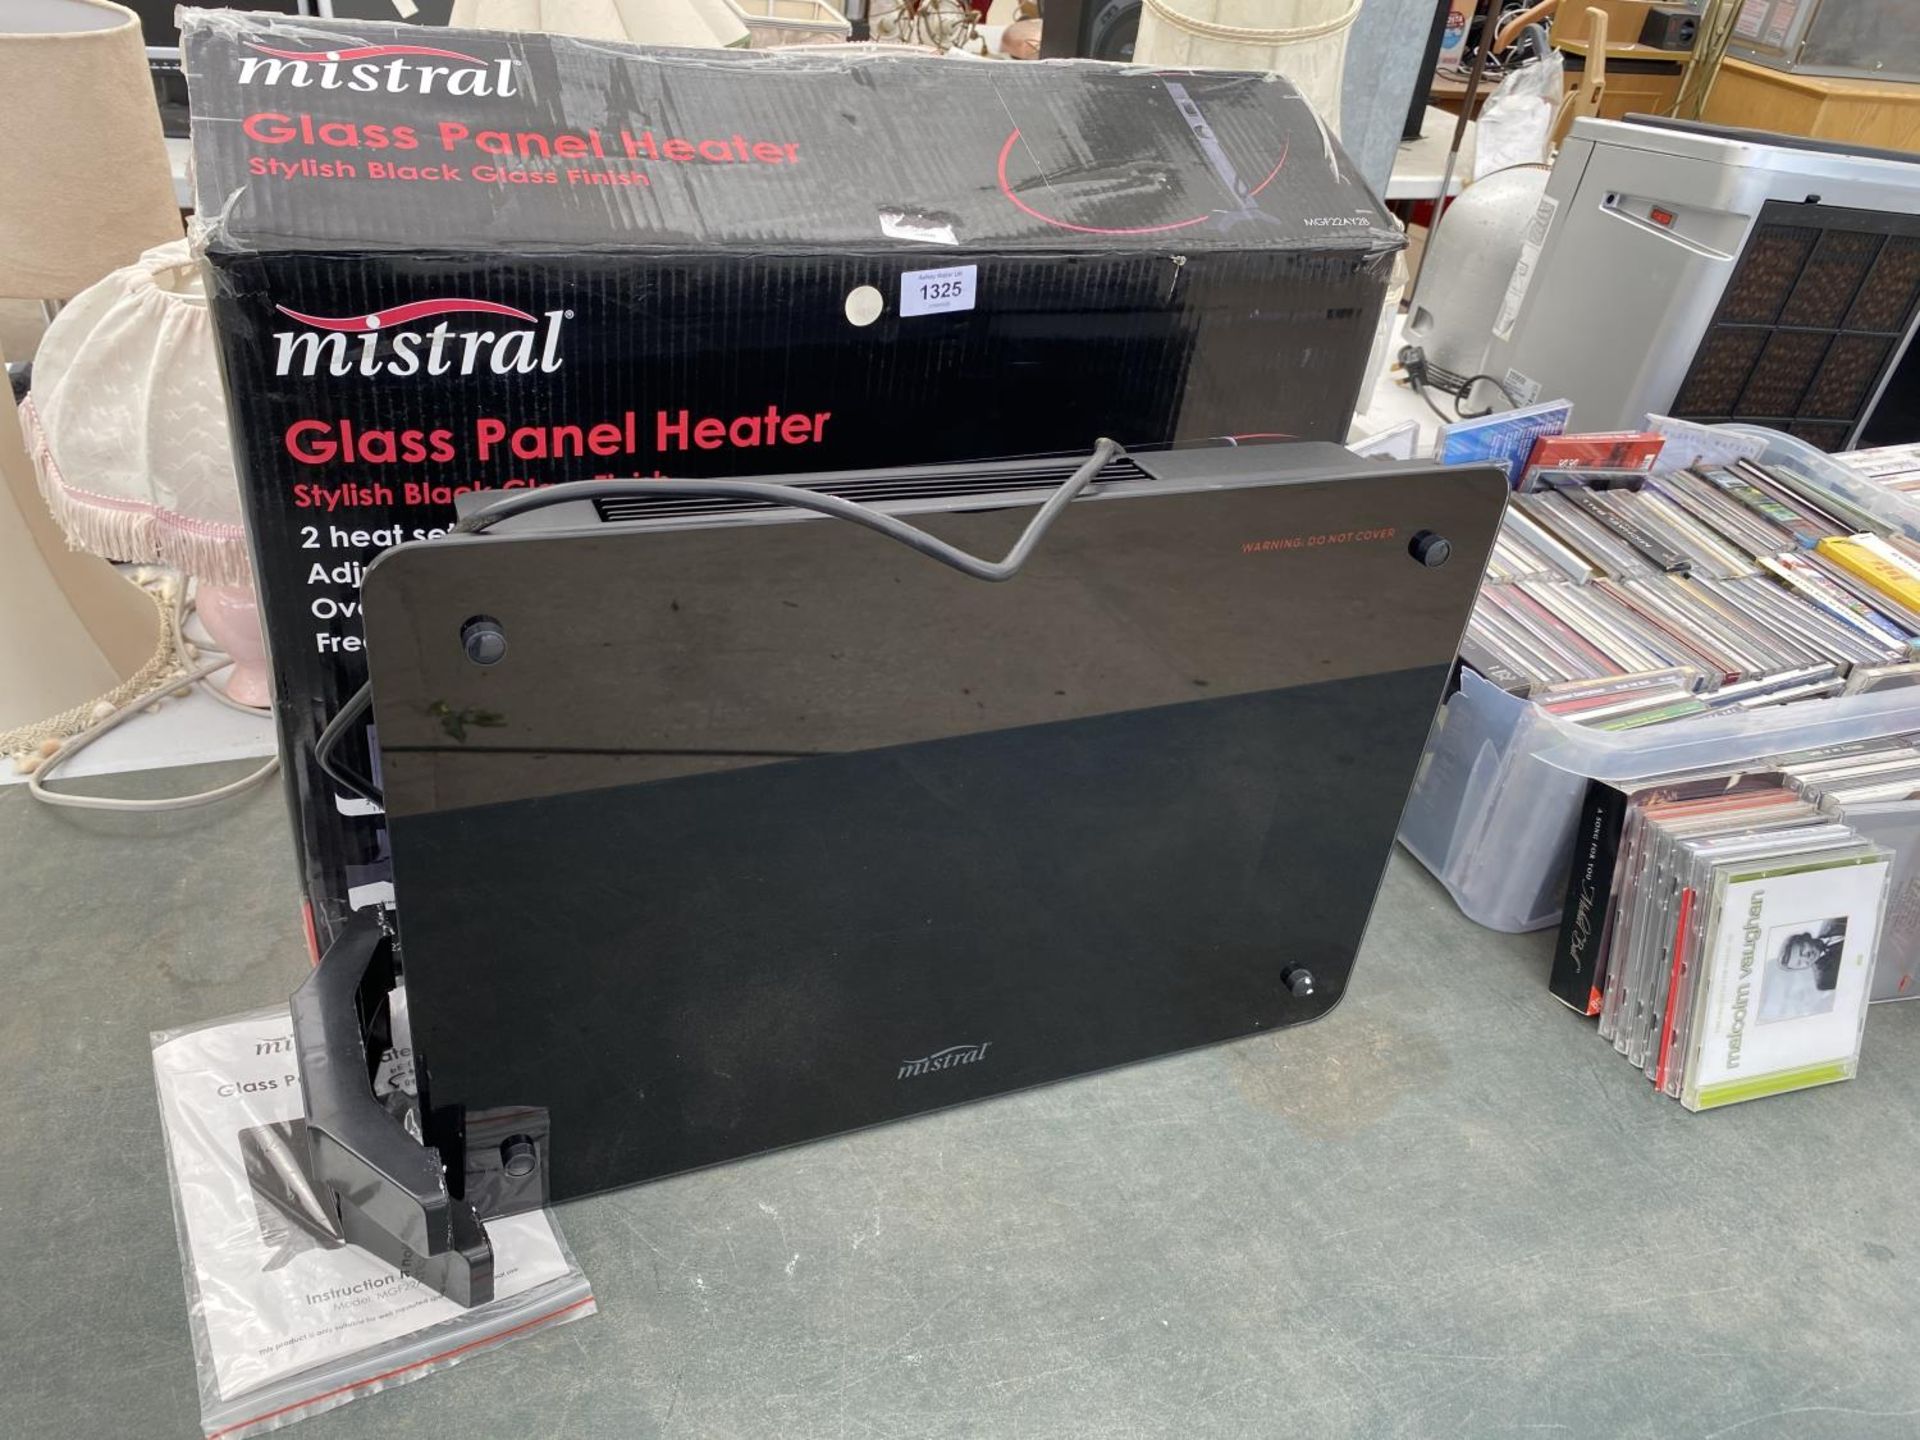 A BOXED MISTRAL GLASS PANEL HEATER - WORKING ORDER